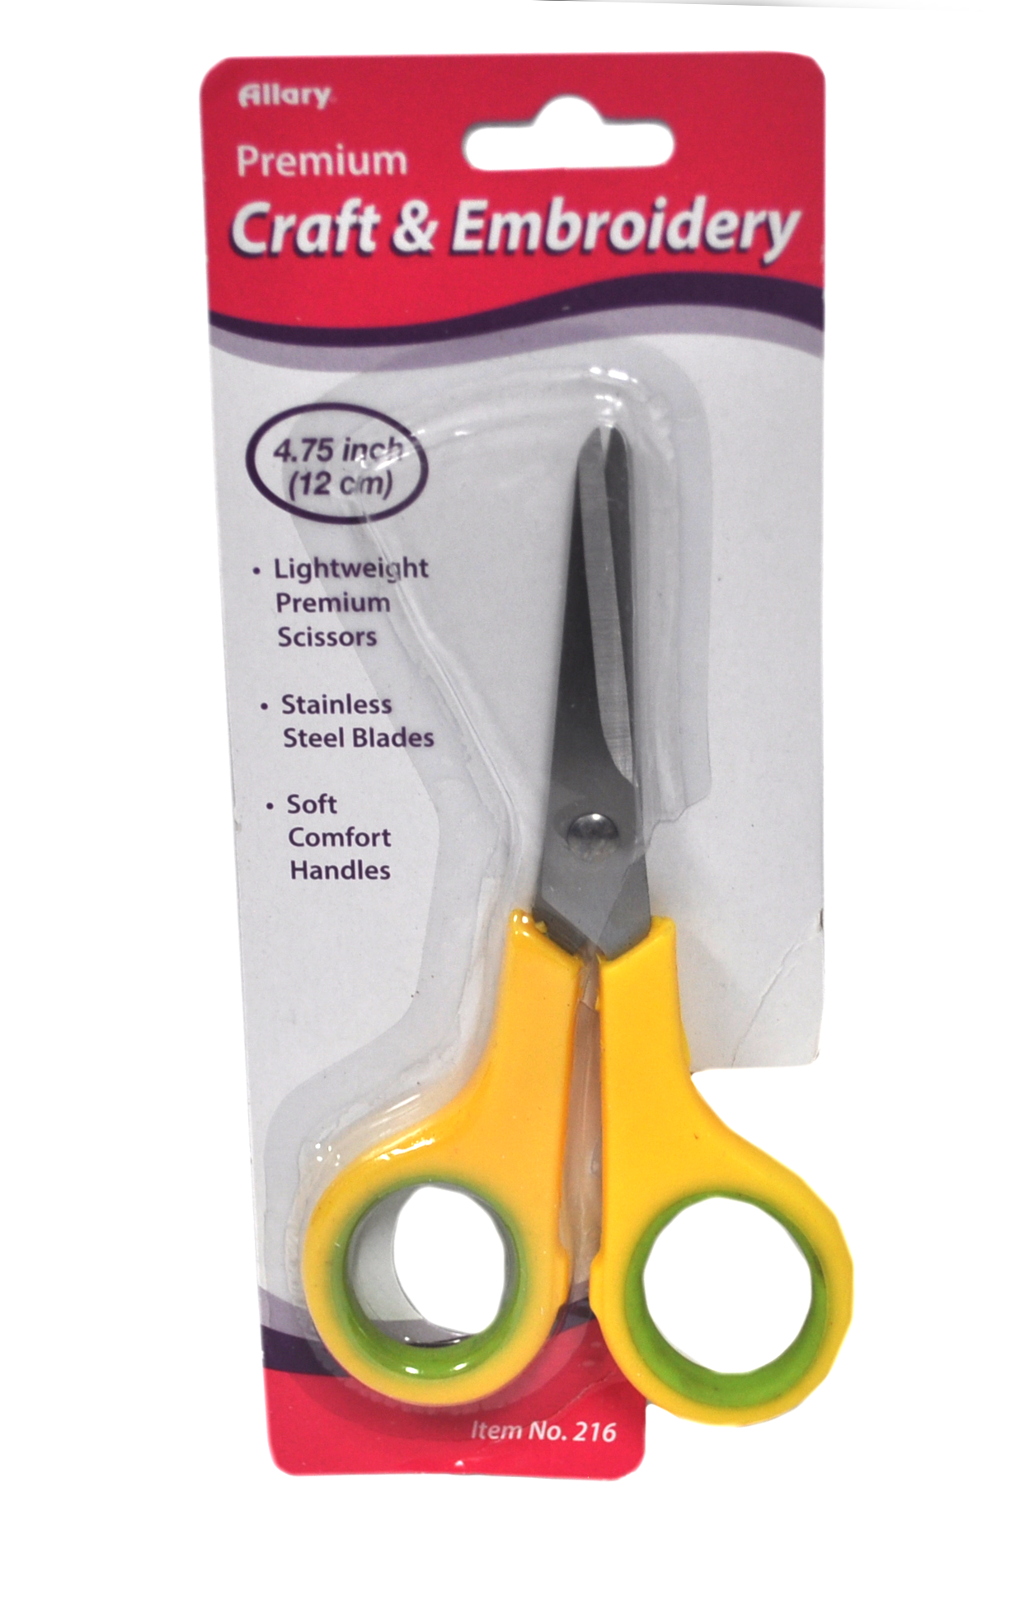 Generic Premium 4 3/4 Inch Craft and Embroidery Scissors Yellow